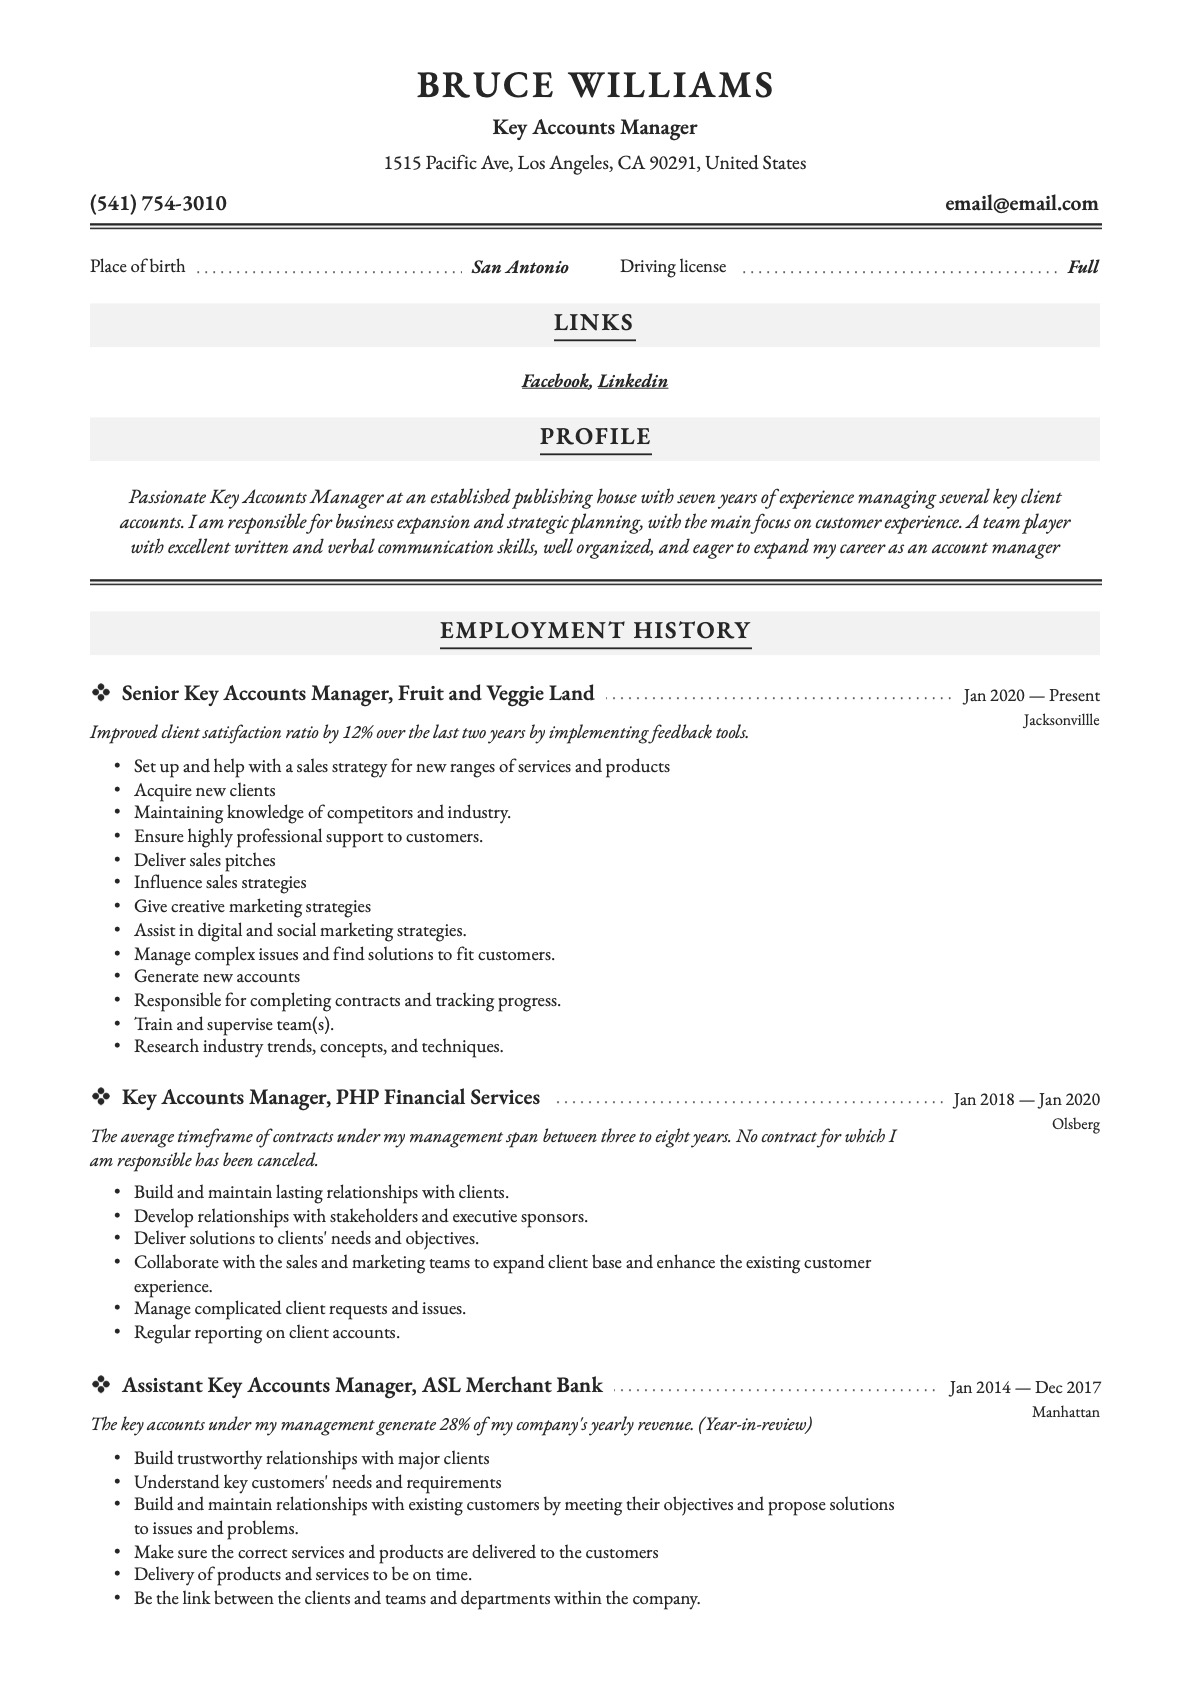 Example resume key accounts manager-10